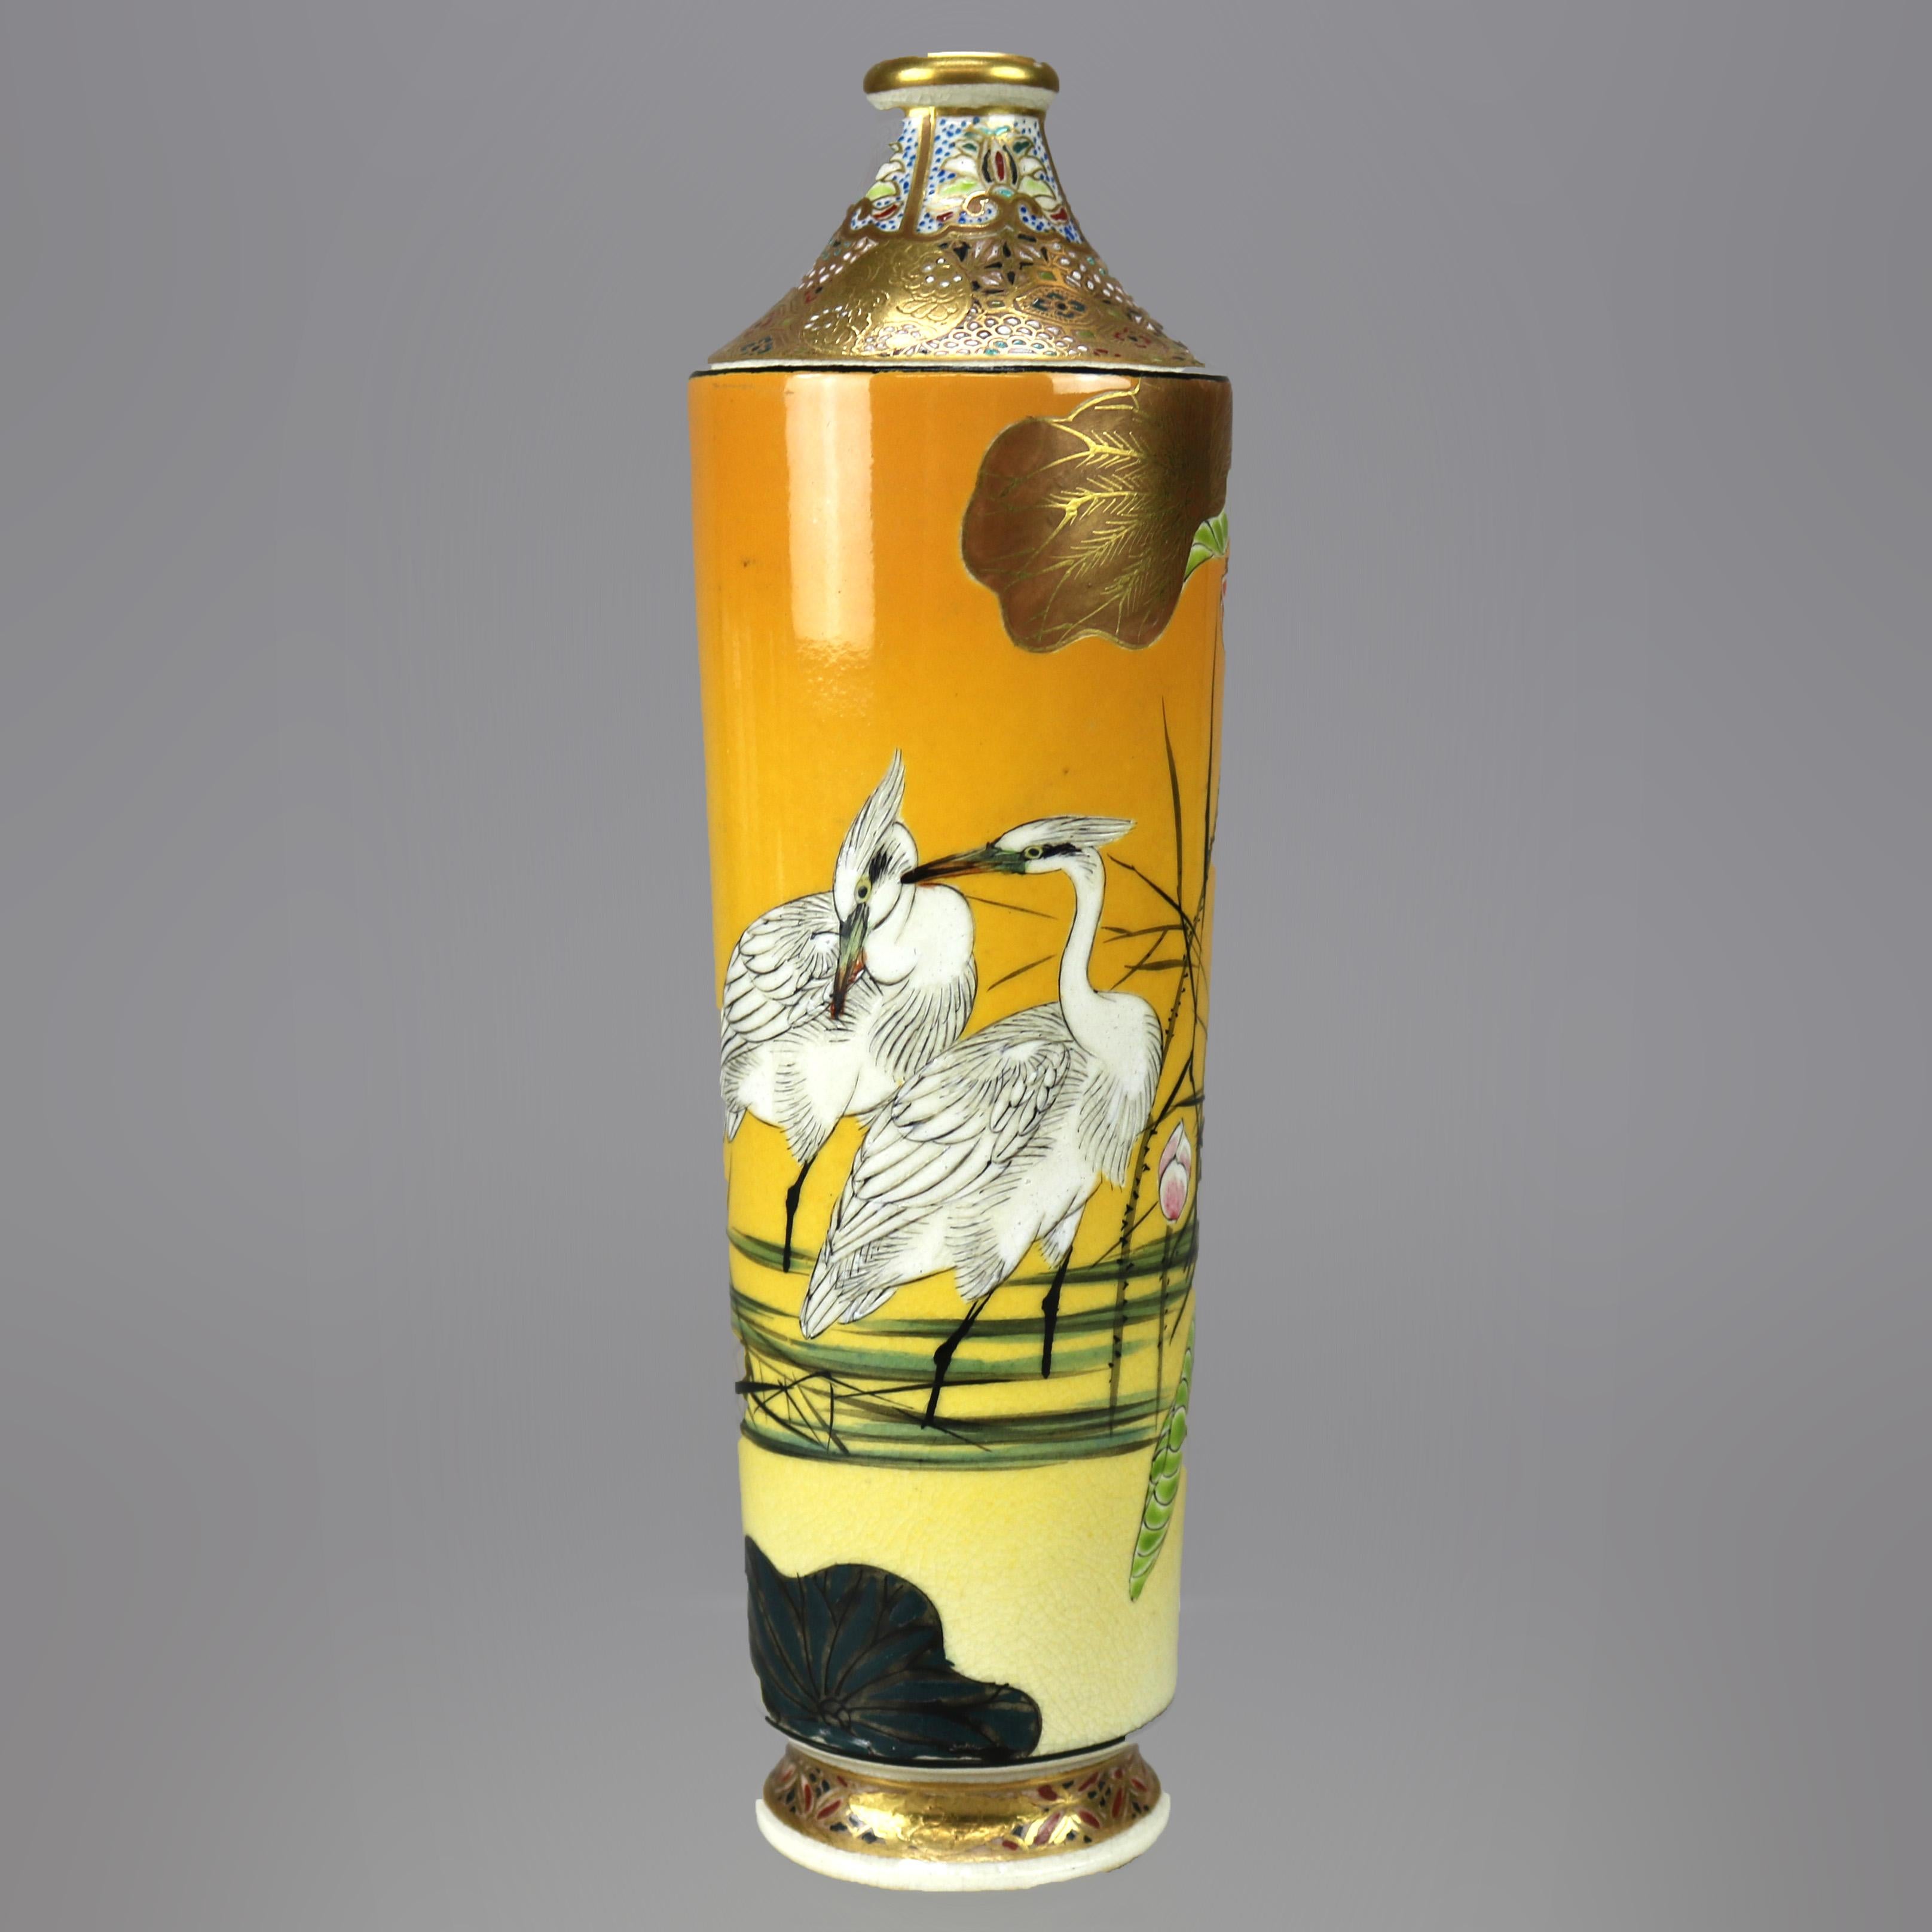 An antique Japanese Aesthetic bottle vase offers porcelain construction with allover hand painted marsh scene having herons, gilt collar with mosaic design, signed on base as photographed, c1900

Measures - 7.25''Height x 2''Wide x 2''Diameter.